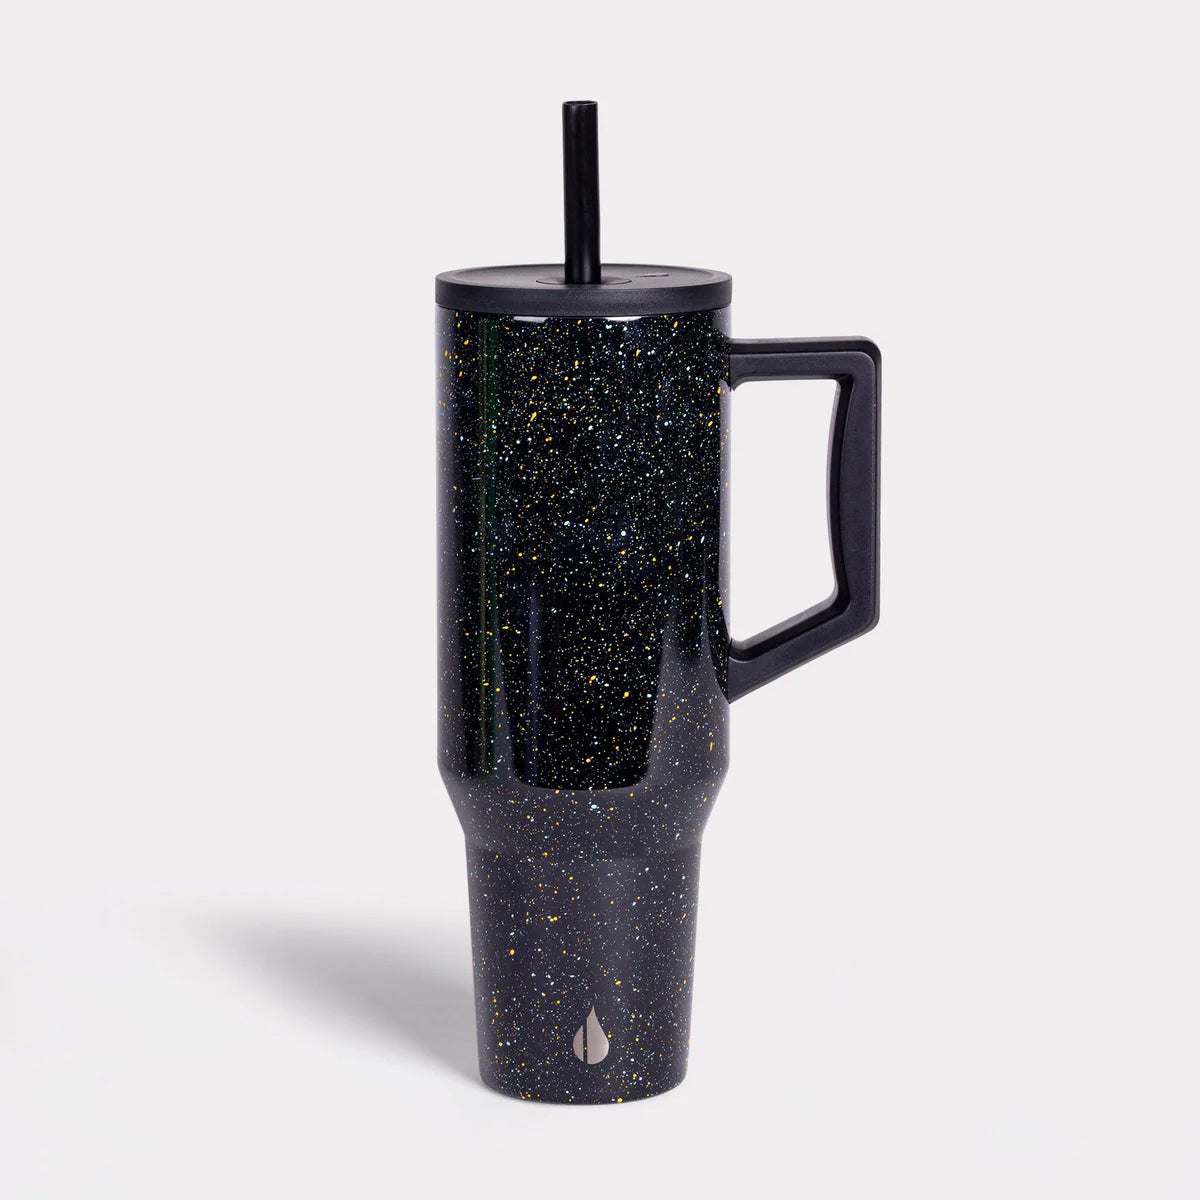 Customized Elemental 40 oz stainless steel tumbler with interchangeable straws in speckle black.